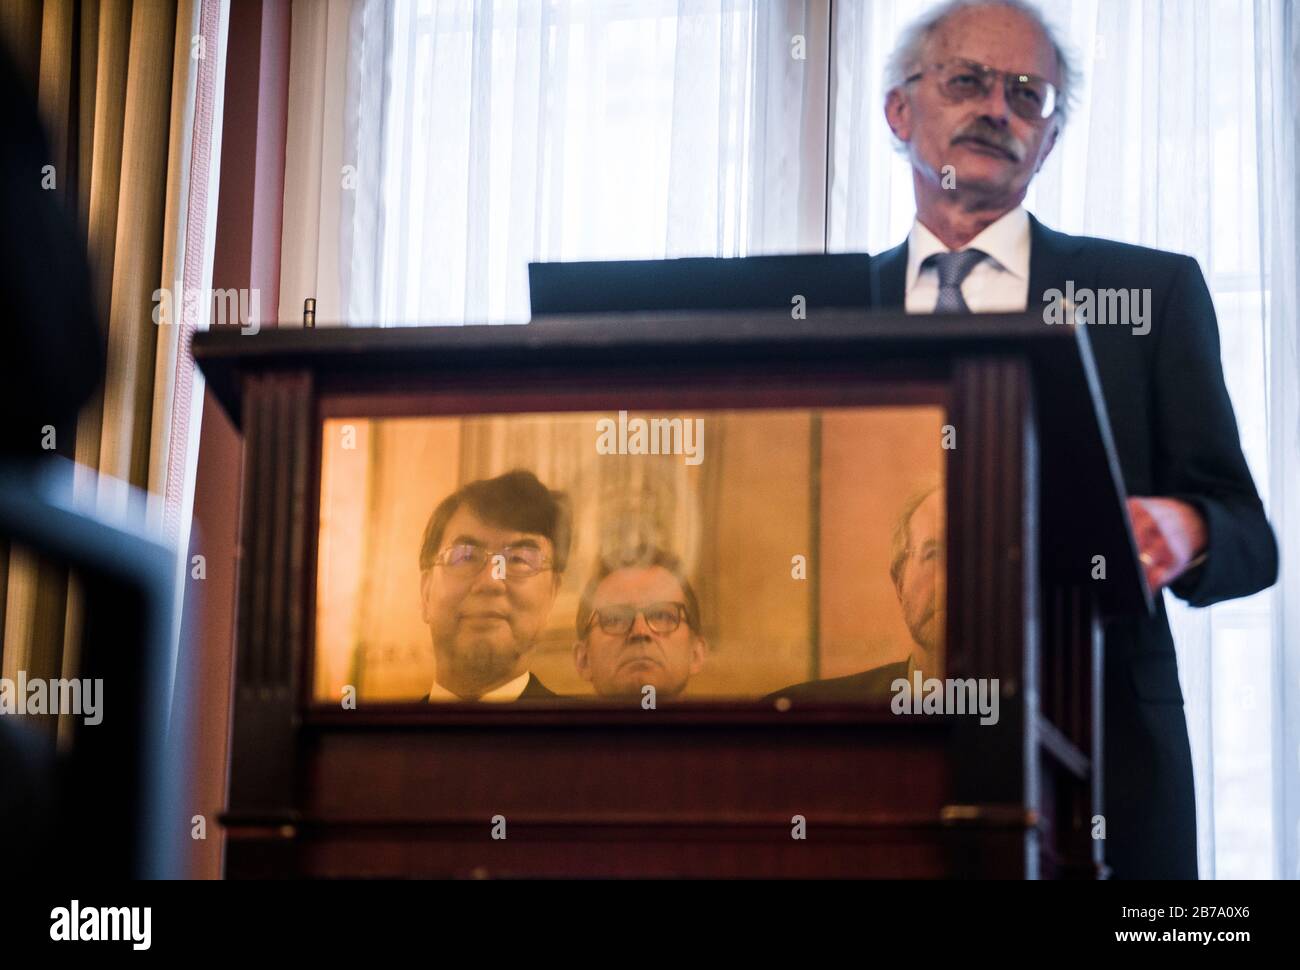 14 March 2020, Hessen, Frankfurt/Main: During the non-public presentation of the Paul Ehrlich and Ludwig Darmstaedter Prize to him, Japanese immunologist Shimon Sakaguchi (below left) is mirrored by a brass plate in the lectern, while behind him (above right) Professor Hans-Georg Rammensee from Tübingen gives the laudatory speech. The award for basic research is endowed with 120,000 euros. Due to the corona virus, the ceremony and a press conference were cancelled. Photo: Frank Rumpenhorst/dpa Stock Photo